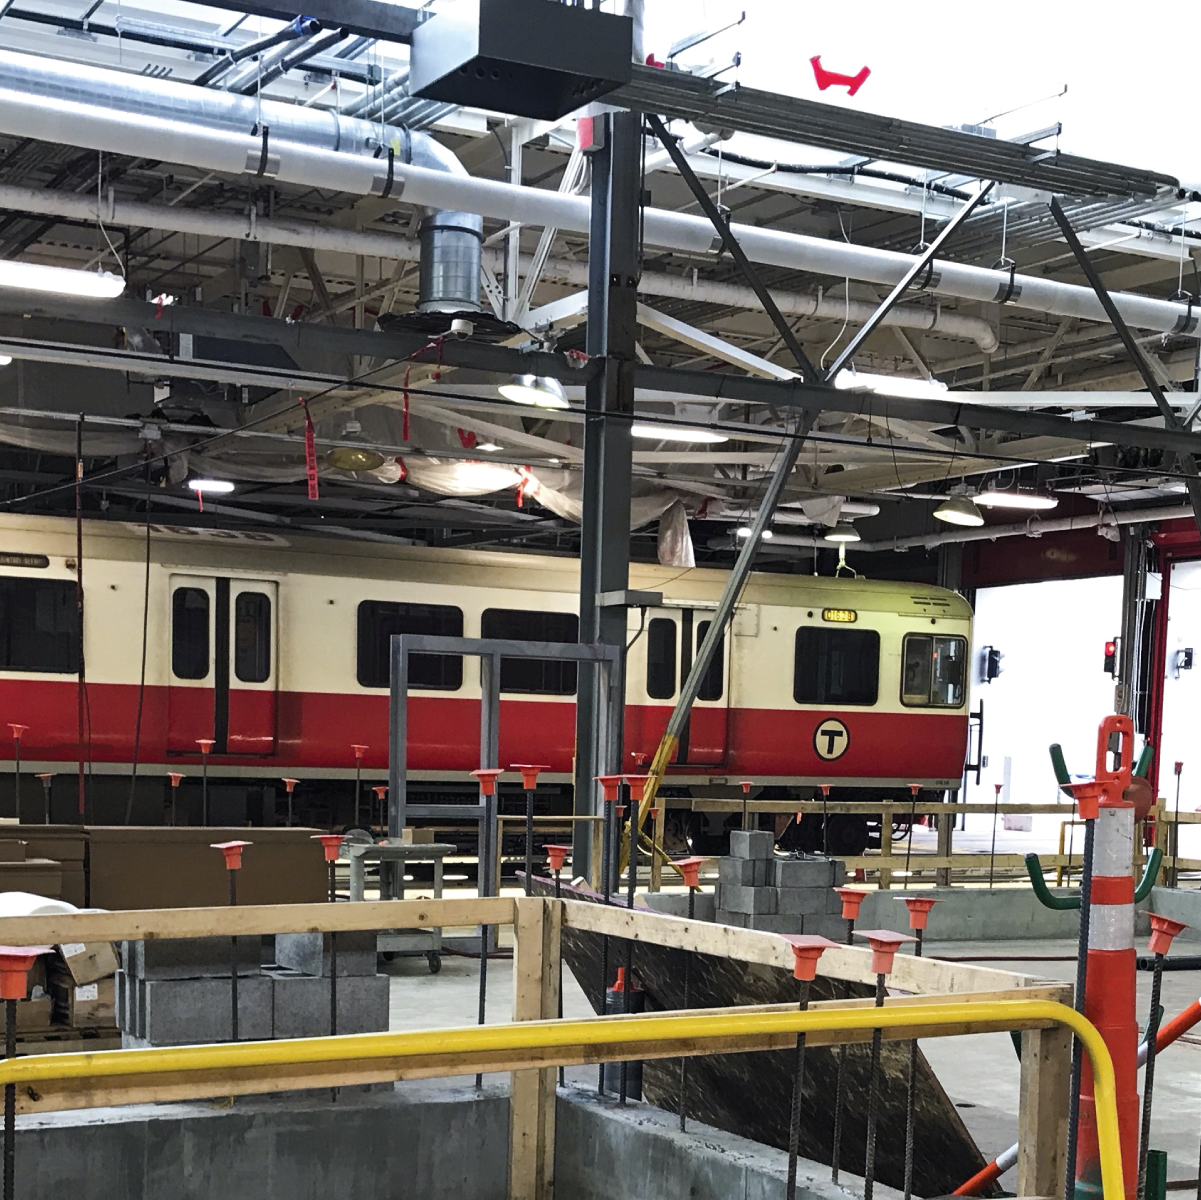 A red line train on a lift inside the Cabot maintenance facility